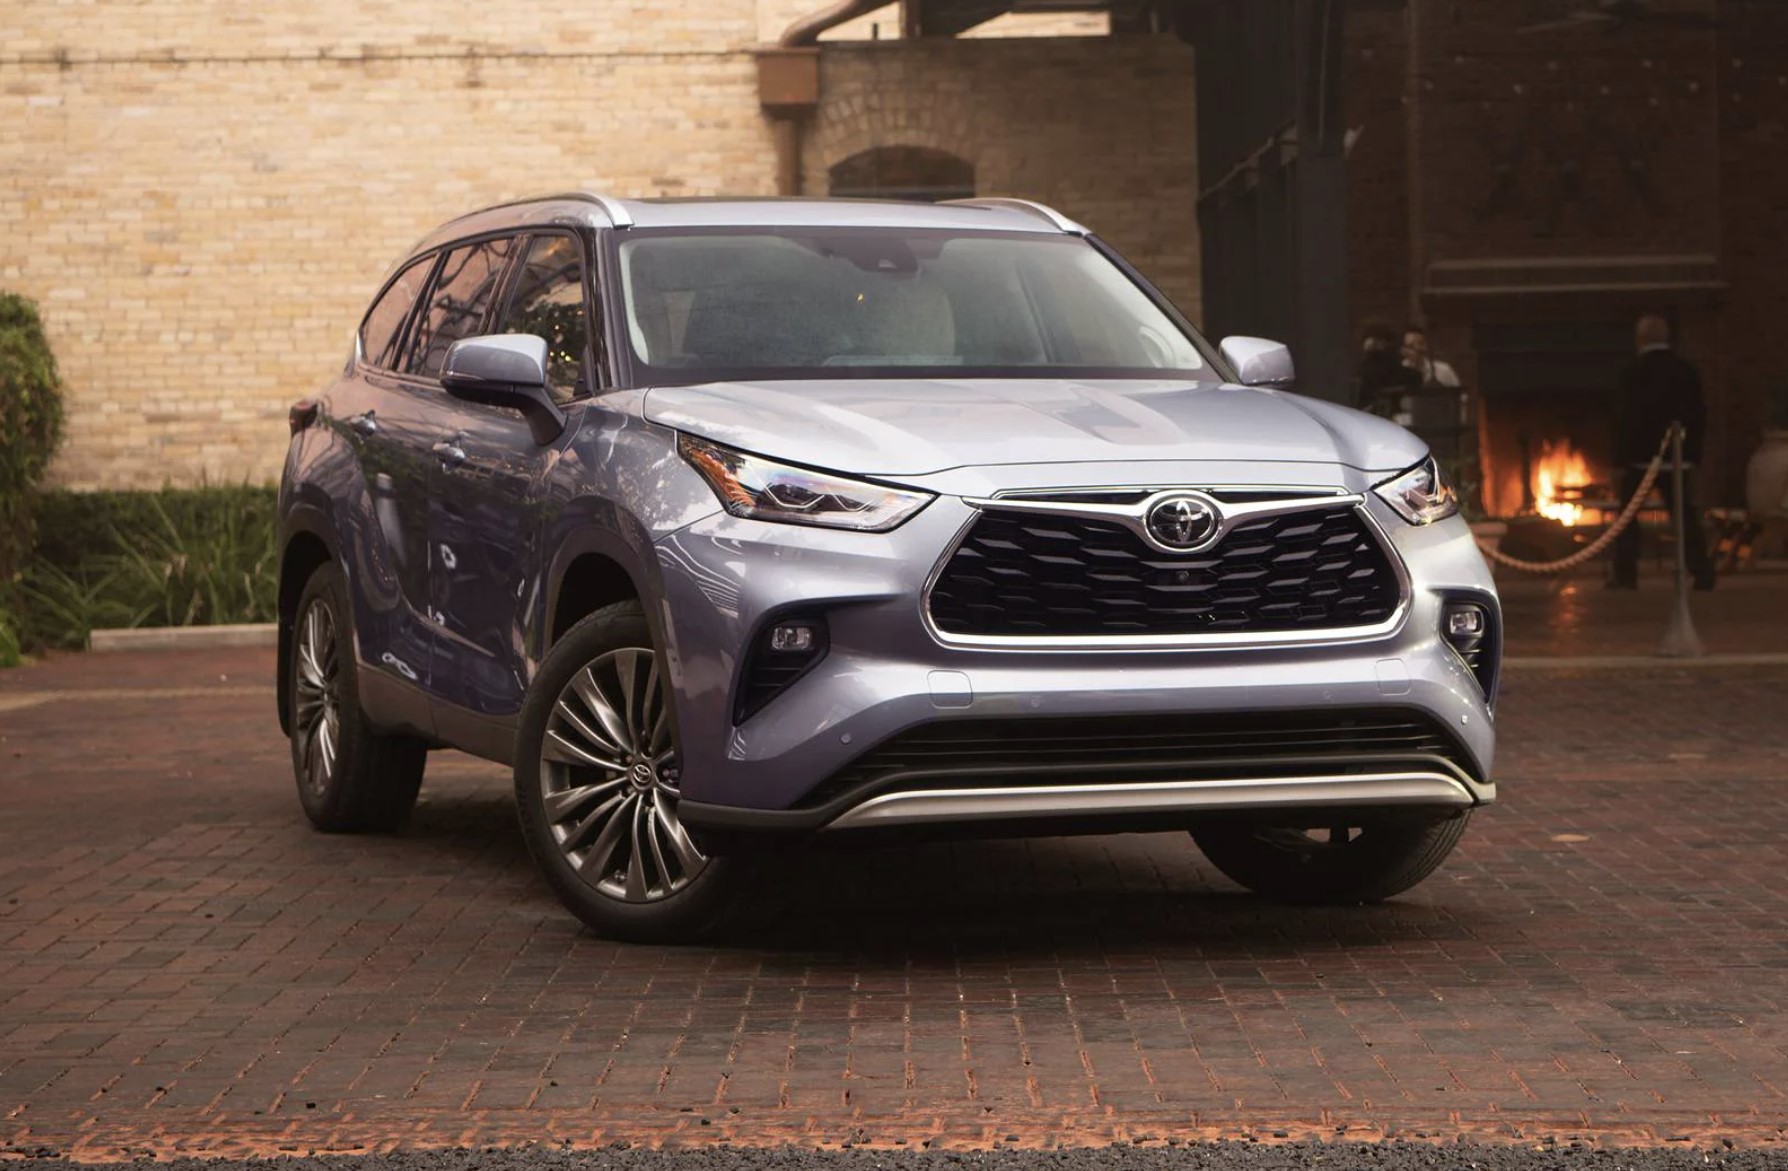 The 2022 Toyota Highlander parked in an urban environment